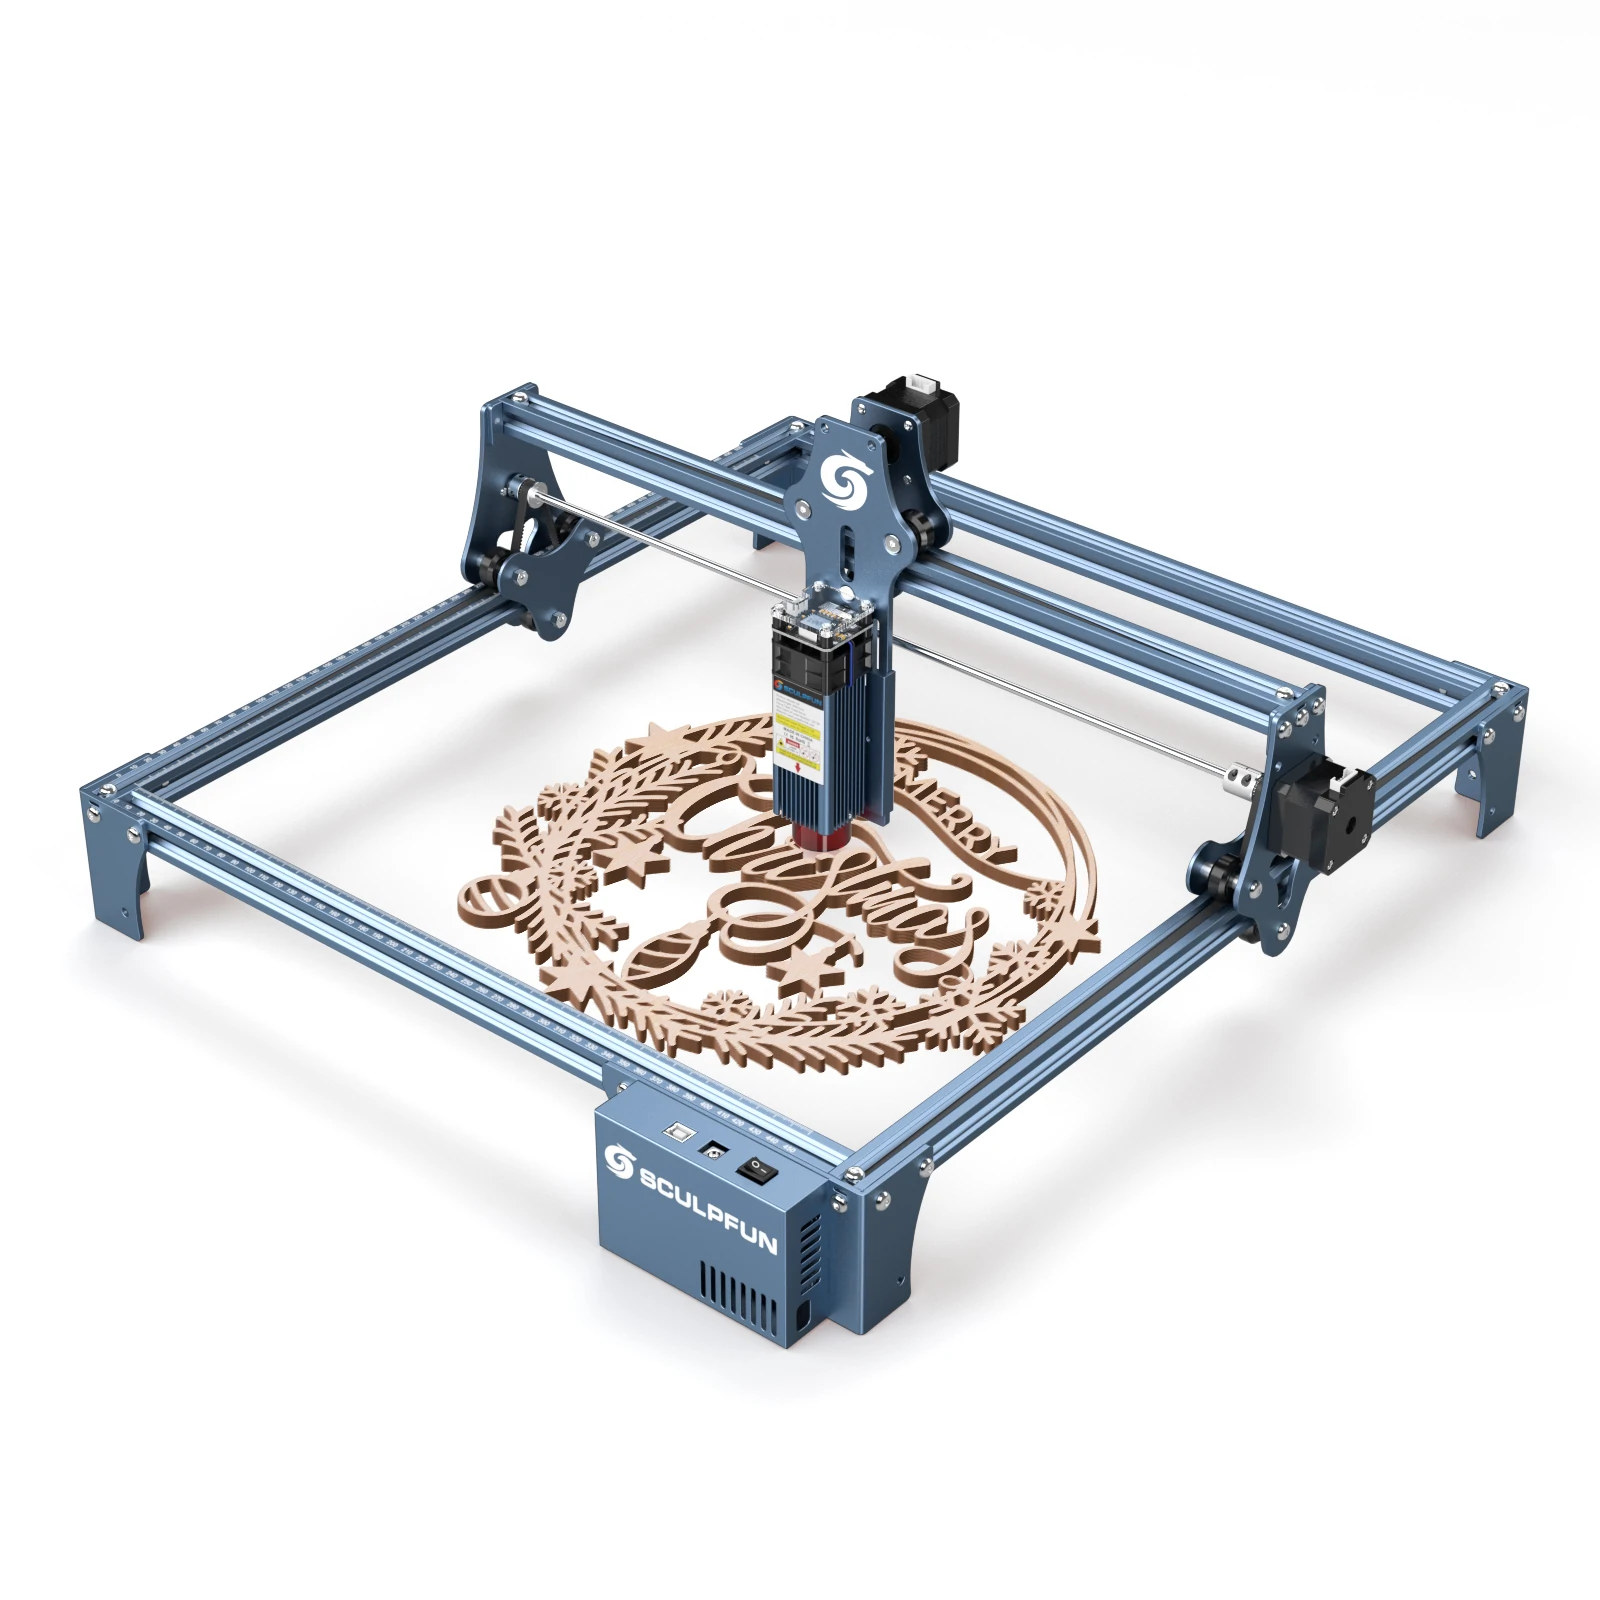 Find New SCULPFUN S9 Laser Engraving Machine Ultra thin Laser Beam Shaping Technology High precision Wood Acrylic Laser Engraver Cutting Machine 410x420mm Engraving Area Full Metal Structure Quick Assembly Design for Sale on Gipsybee.com